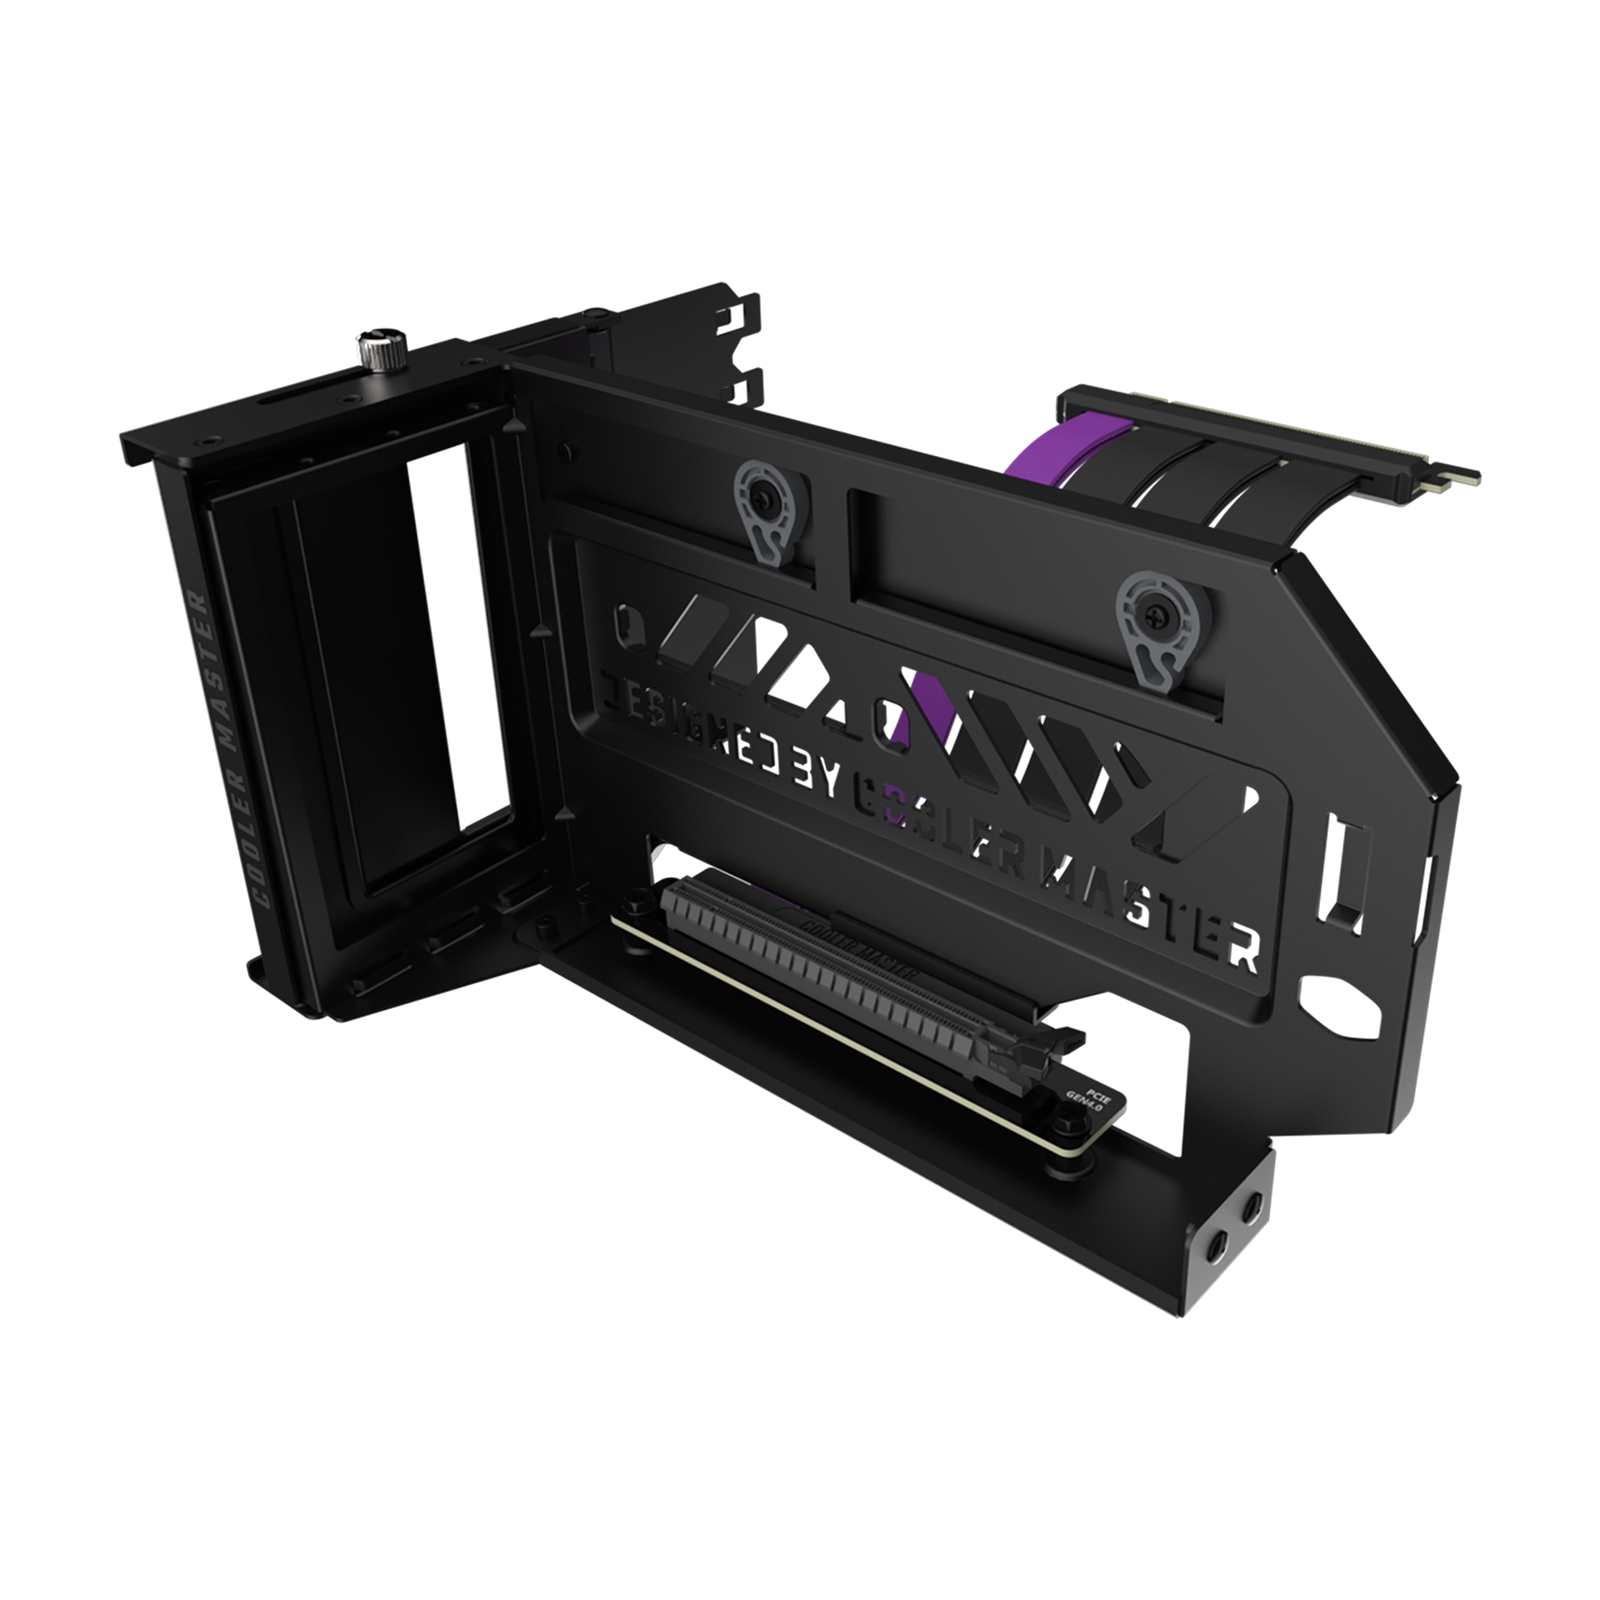 Cooler Master Vertical Graphics Card Holder Kit V3 Black Version, 165mm PCIe 4.0 x16 Riser Cable Included, Compatible with ATX & Micro ATX Cases, Toolless Adjustable Design, Premium Materials with 42% Increased Durability